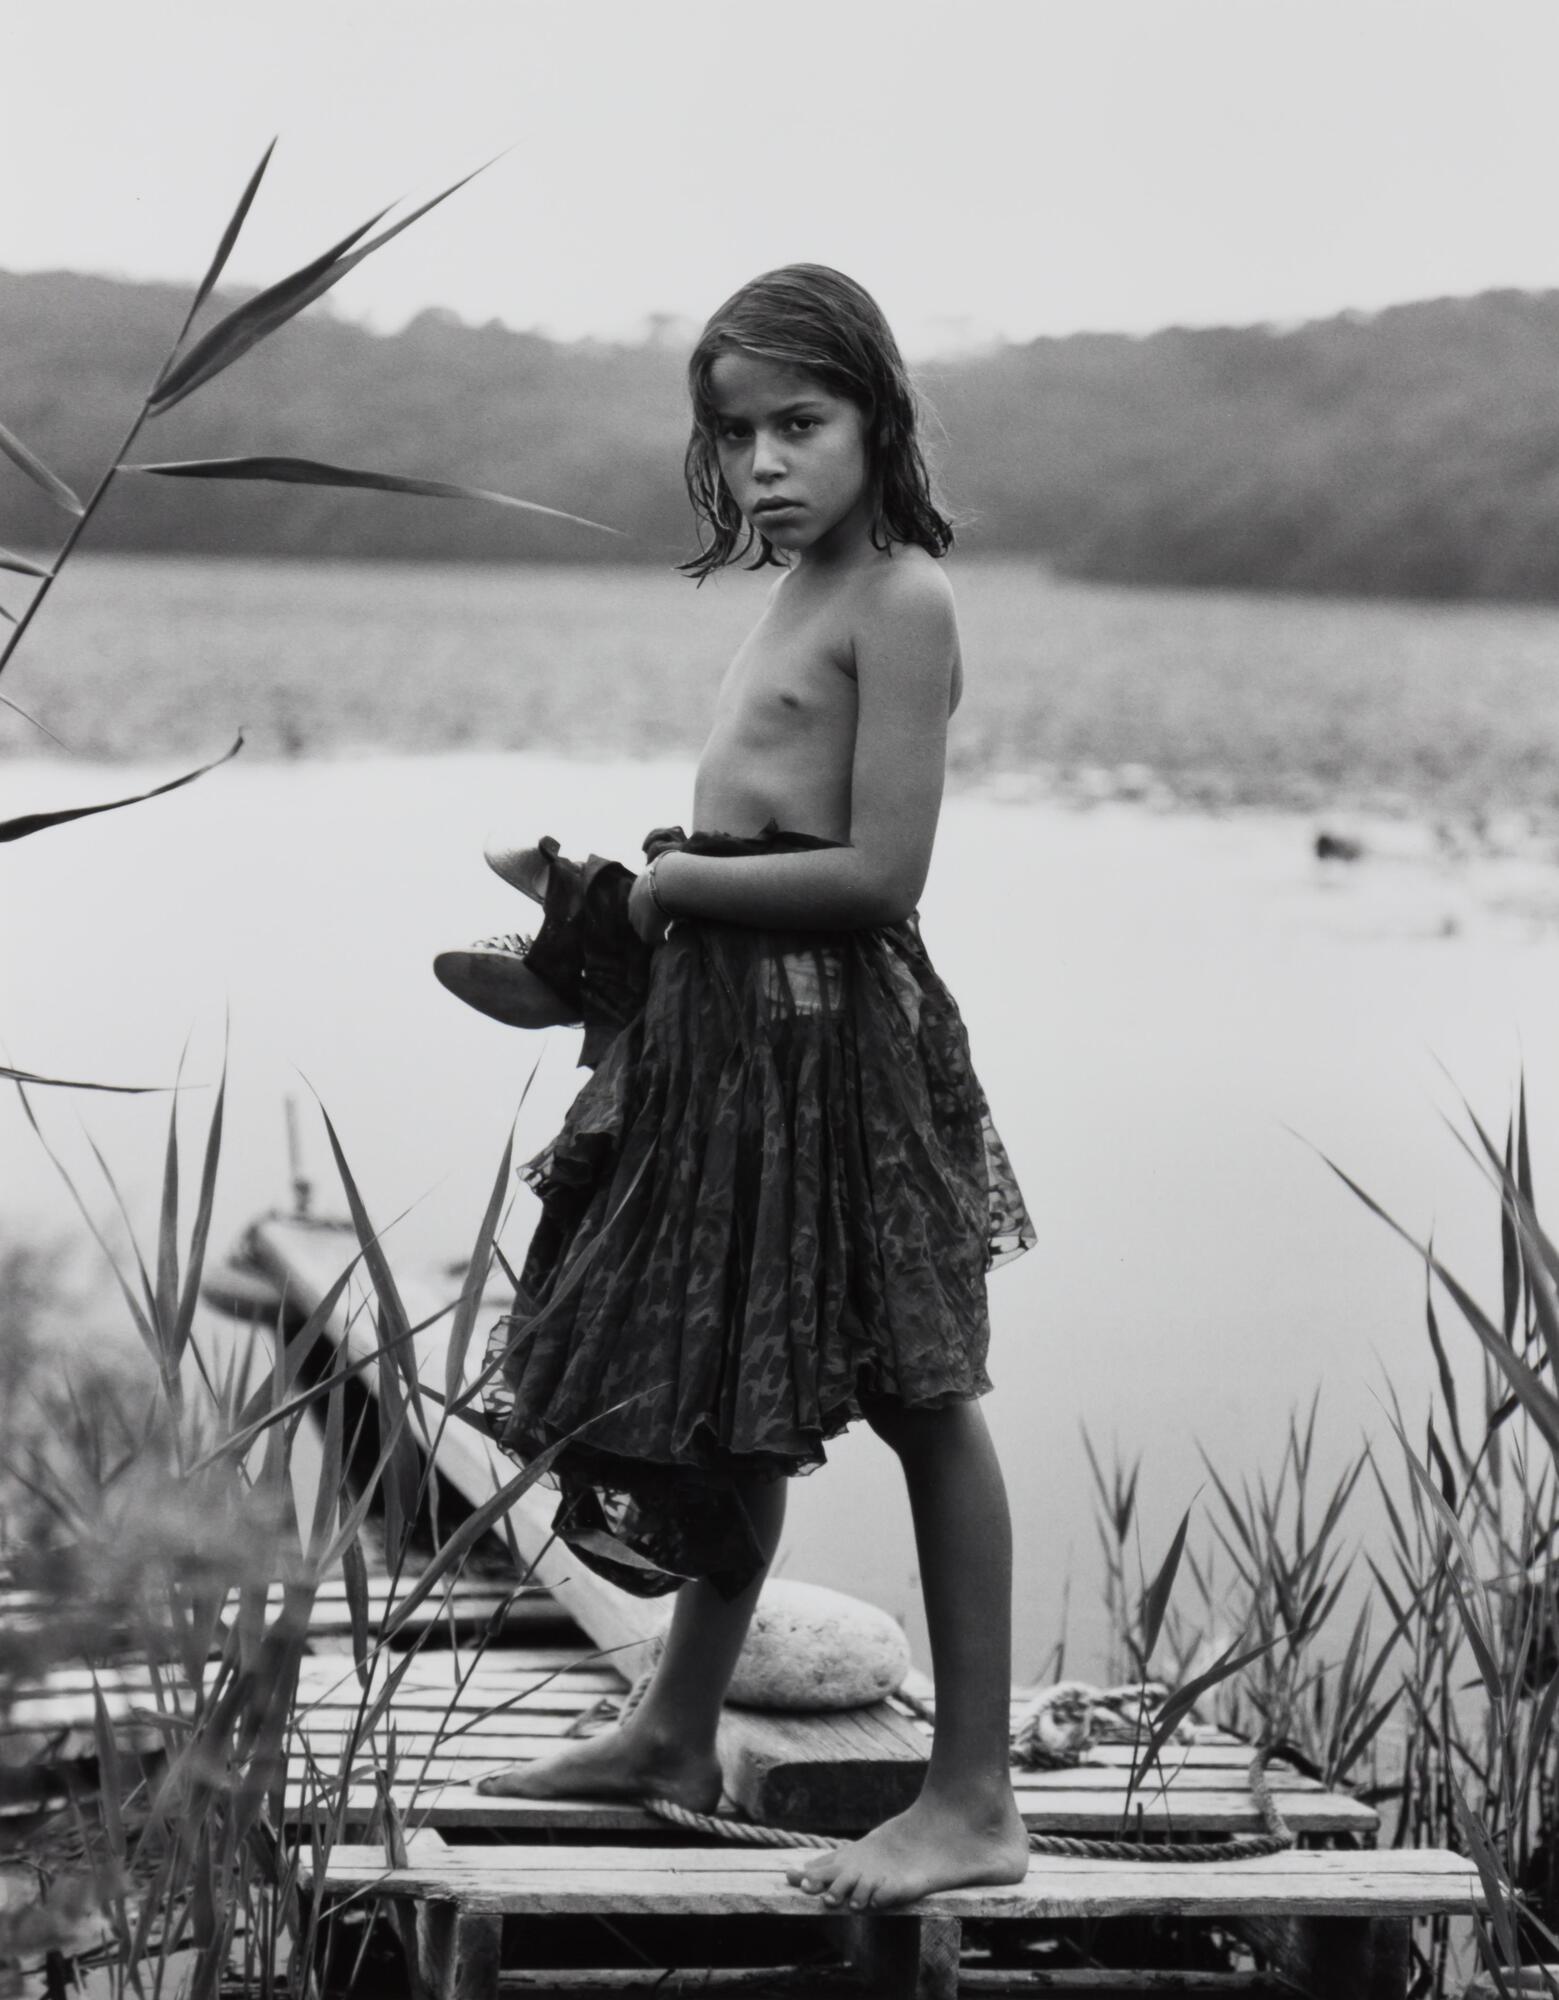 A child in a skirt, standing on a dock holding shoes.